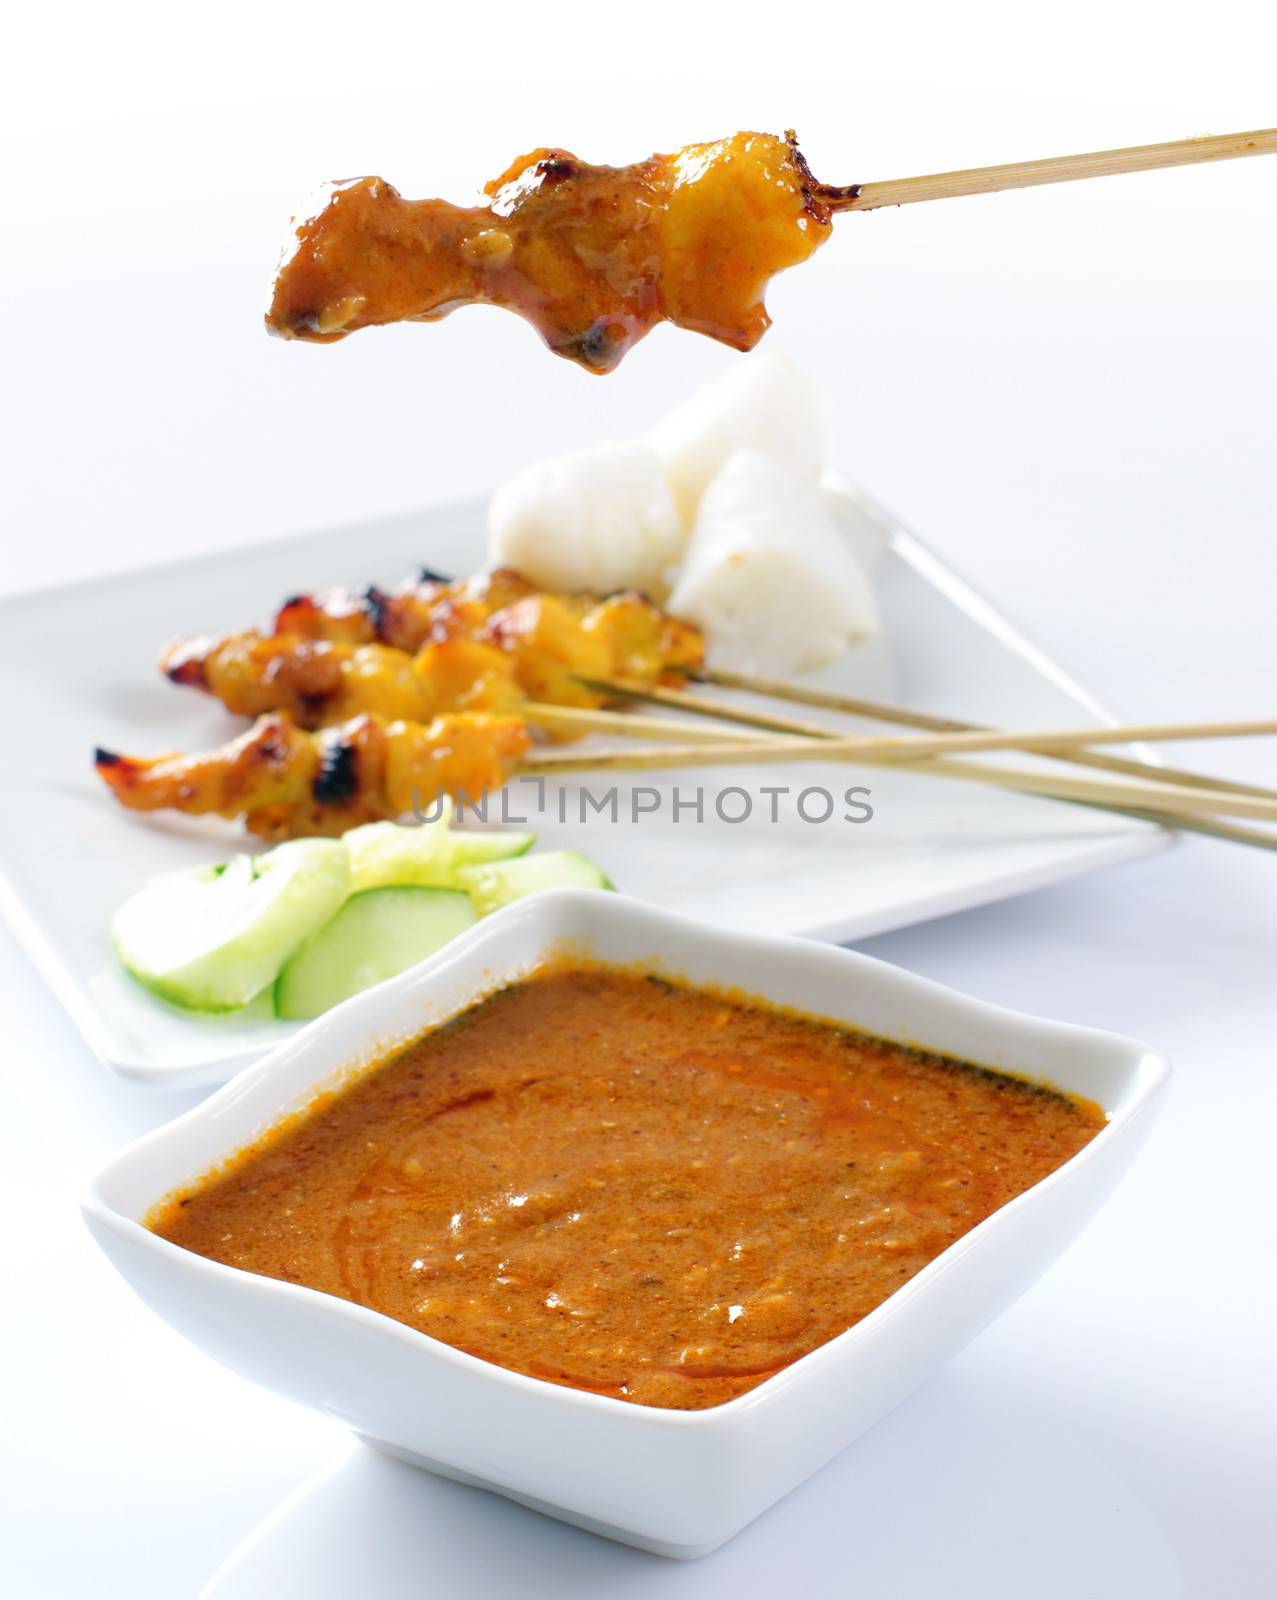 Chicken satay, grilled and skewered meat, served with peanut sauce, cucumber and ketupat. Traditional Malay food. Delicious hot and spicy Malaysian dish, Asian cuisine.